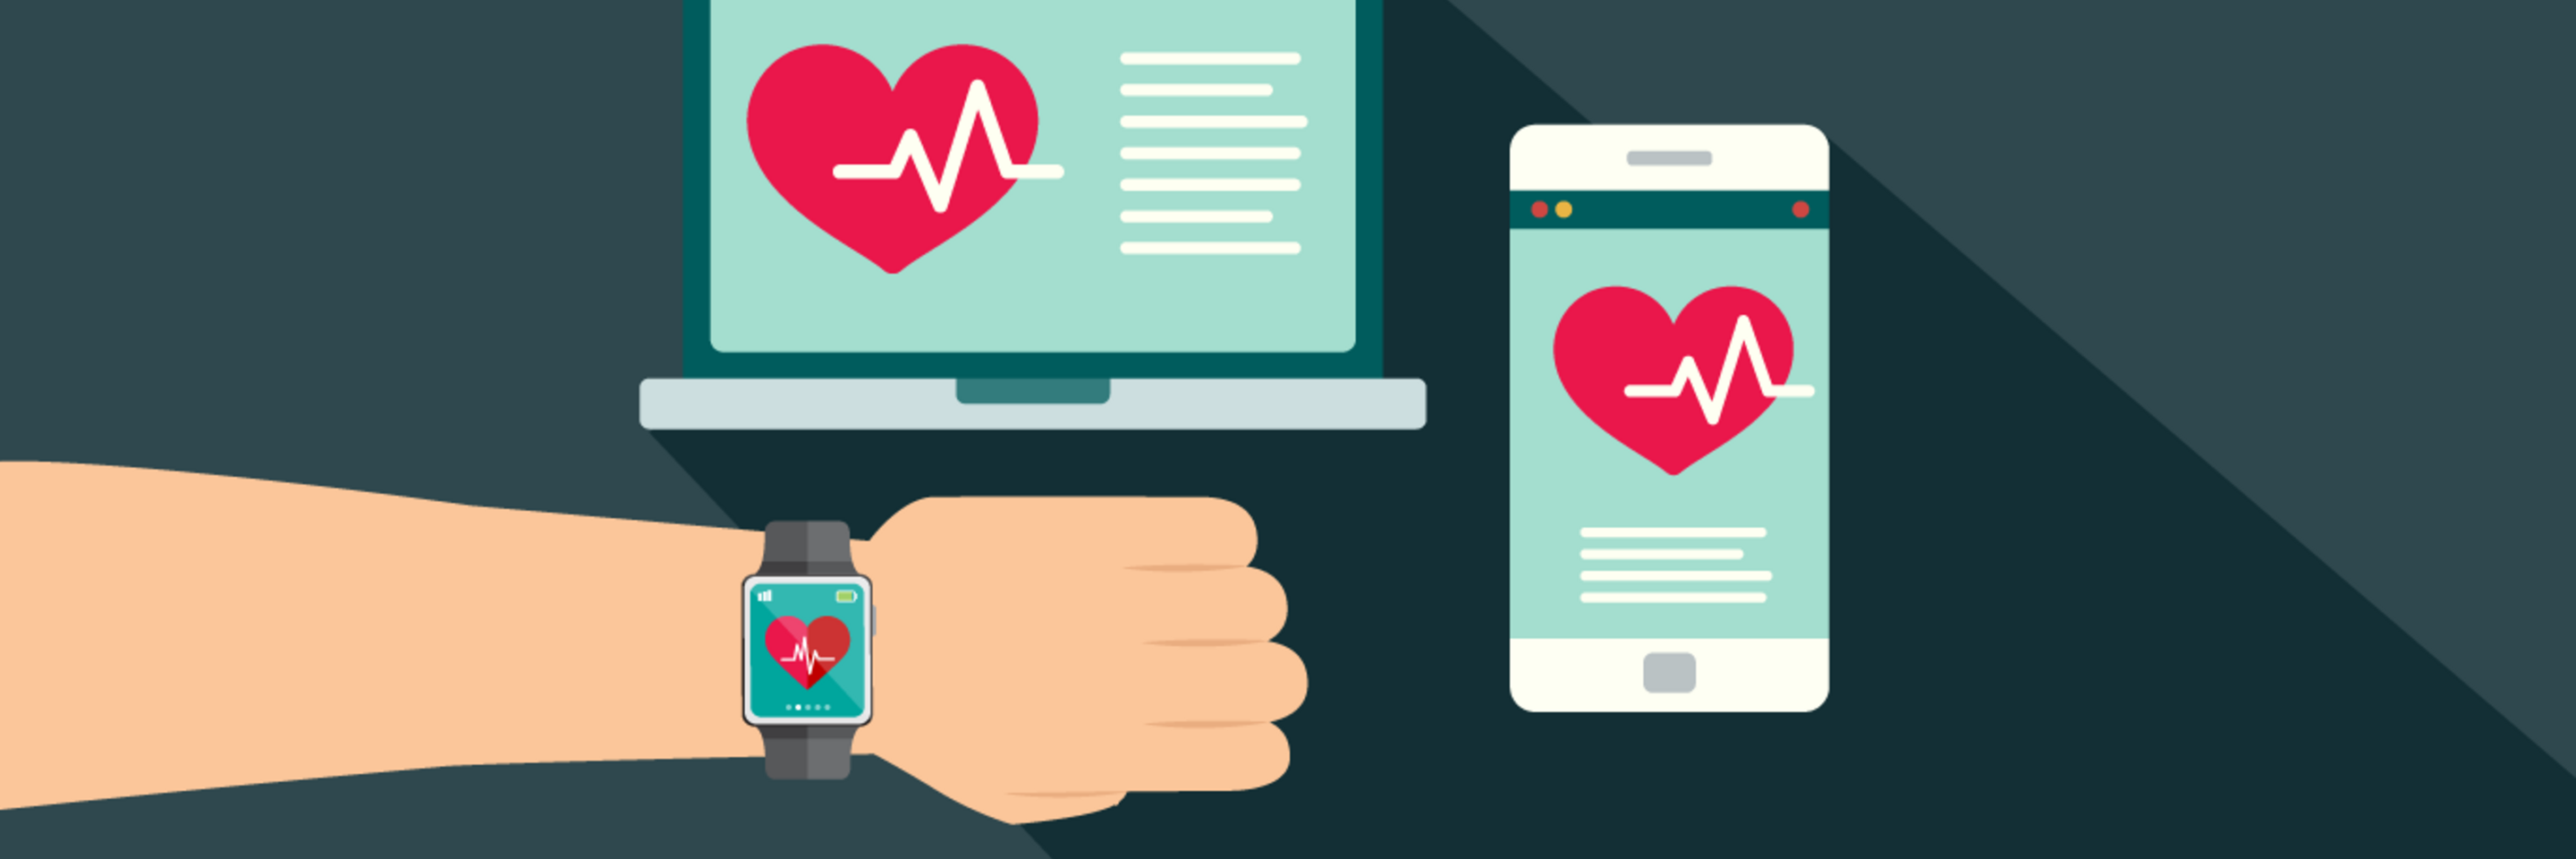 Illustration of smart watch, laptop and a smart phone using Health Apps